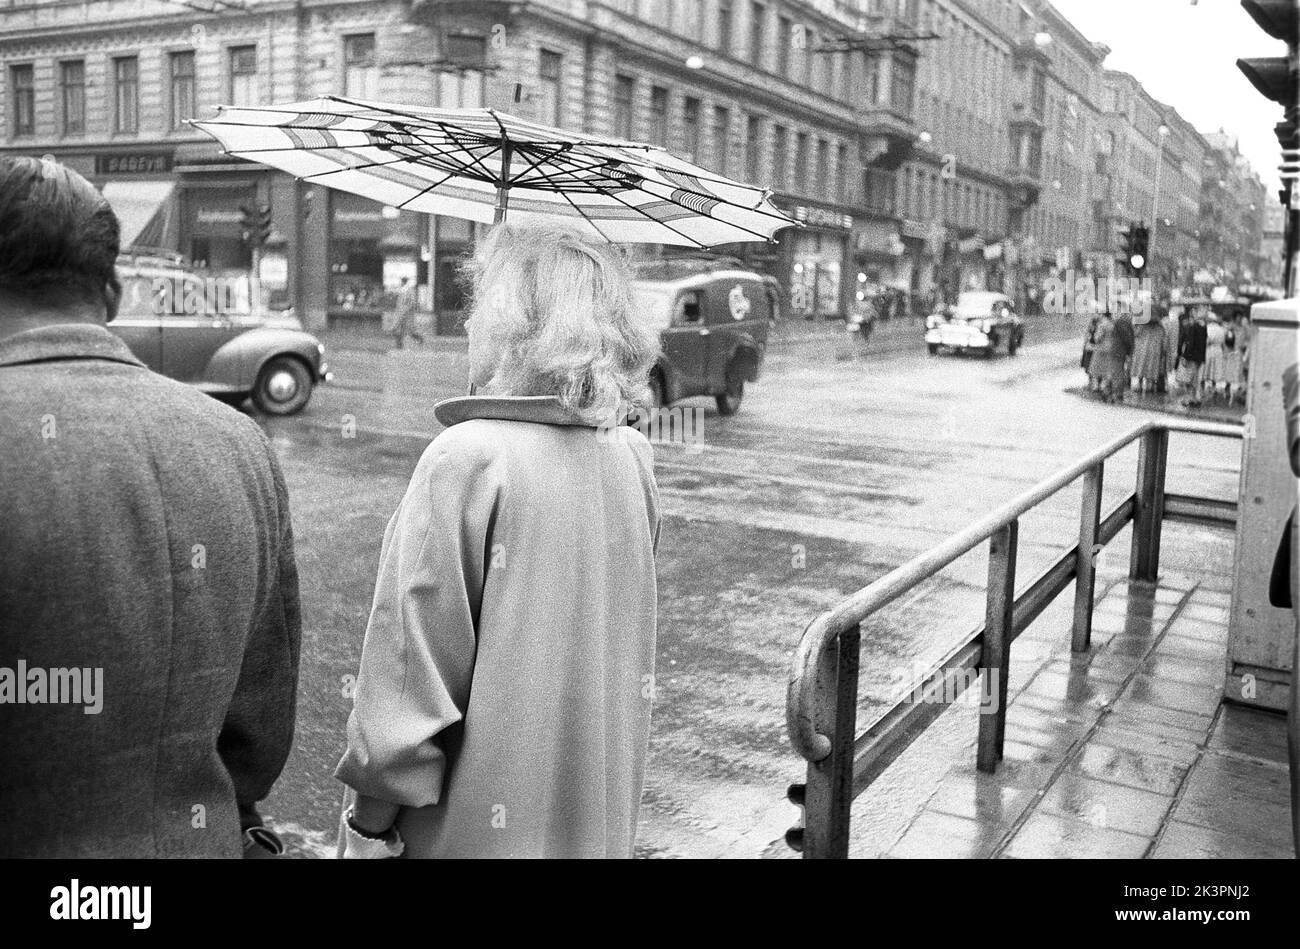 Umbrellas in the 1950s. The rain is pouring and a woman is seen holding an umbrella over herself. It's a rainy day in Stockholm Sweden 1953. ref 2A-1 Stock Photo